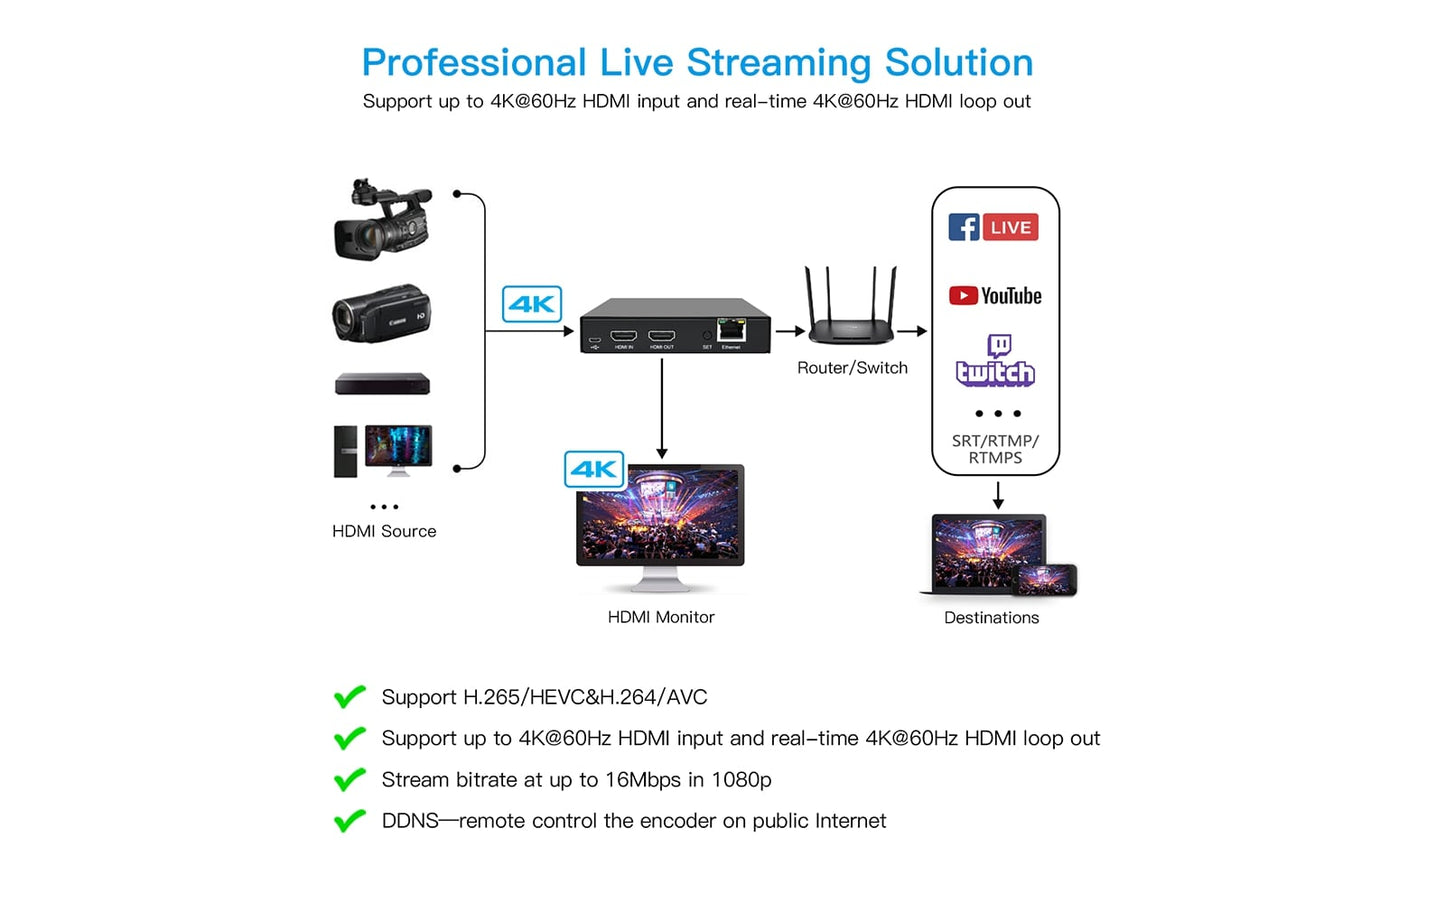 Loopout HDMI Video Encoder - Professional Live Streaming Solution - DDMALL